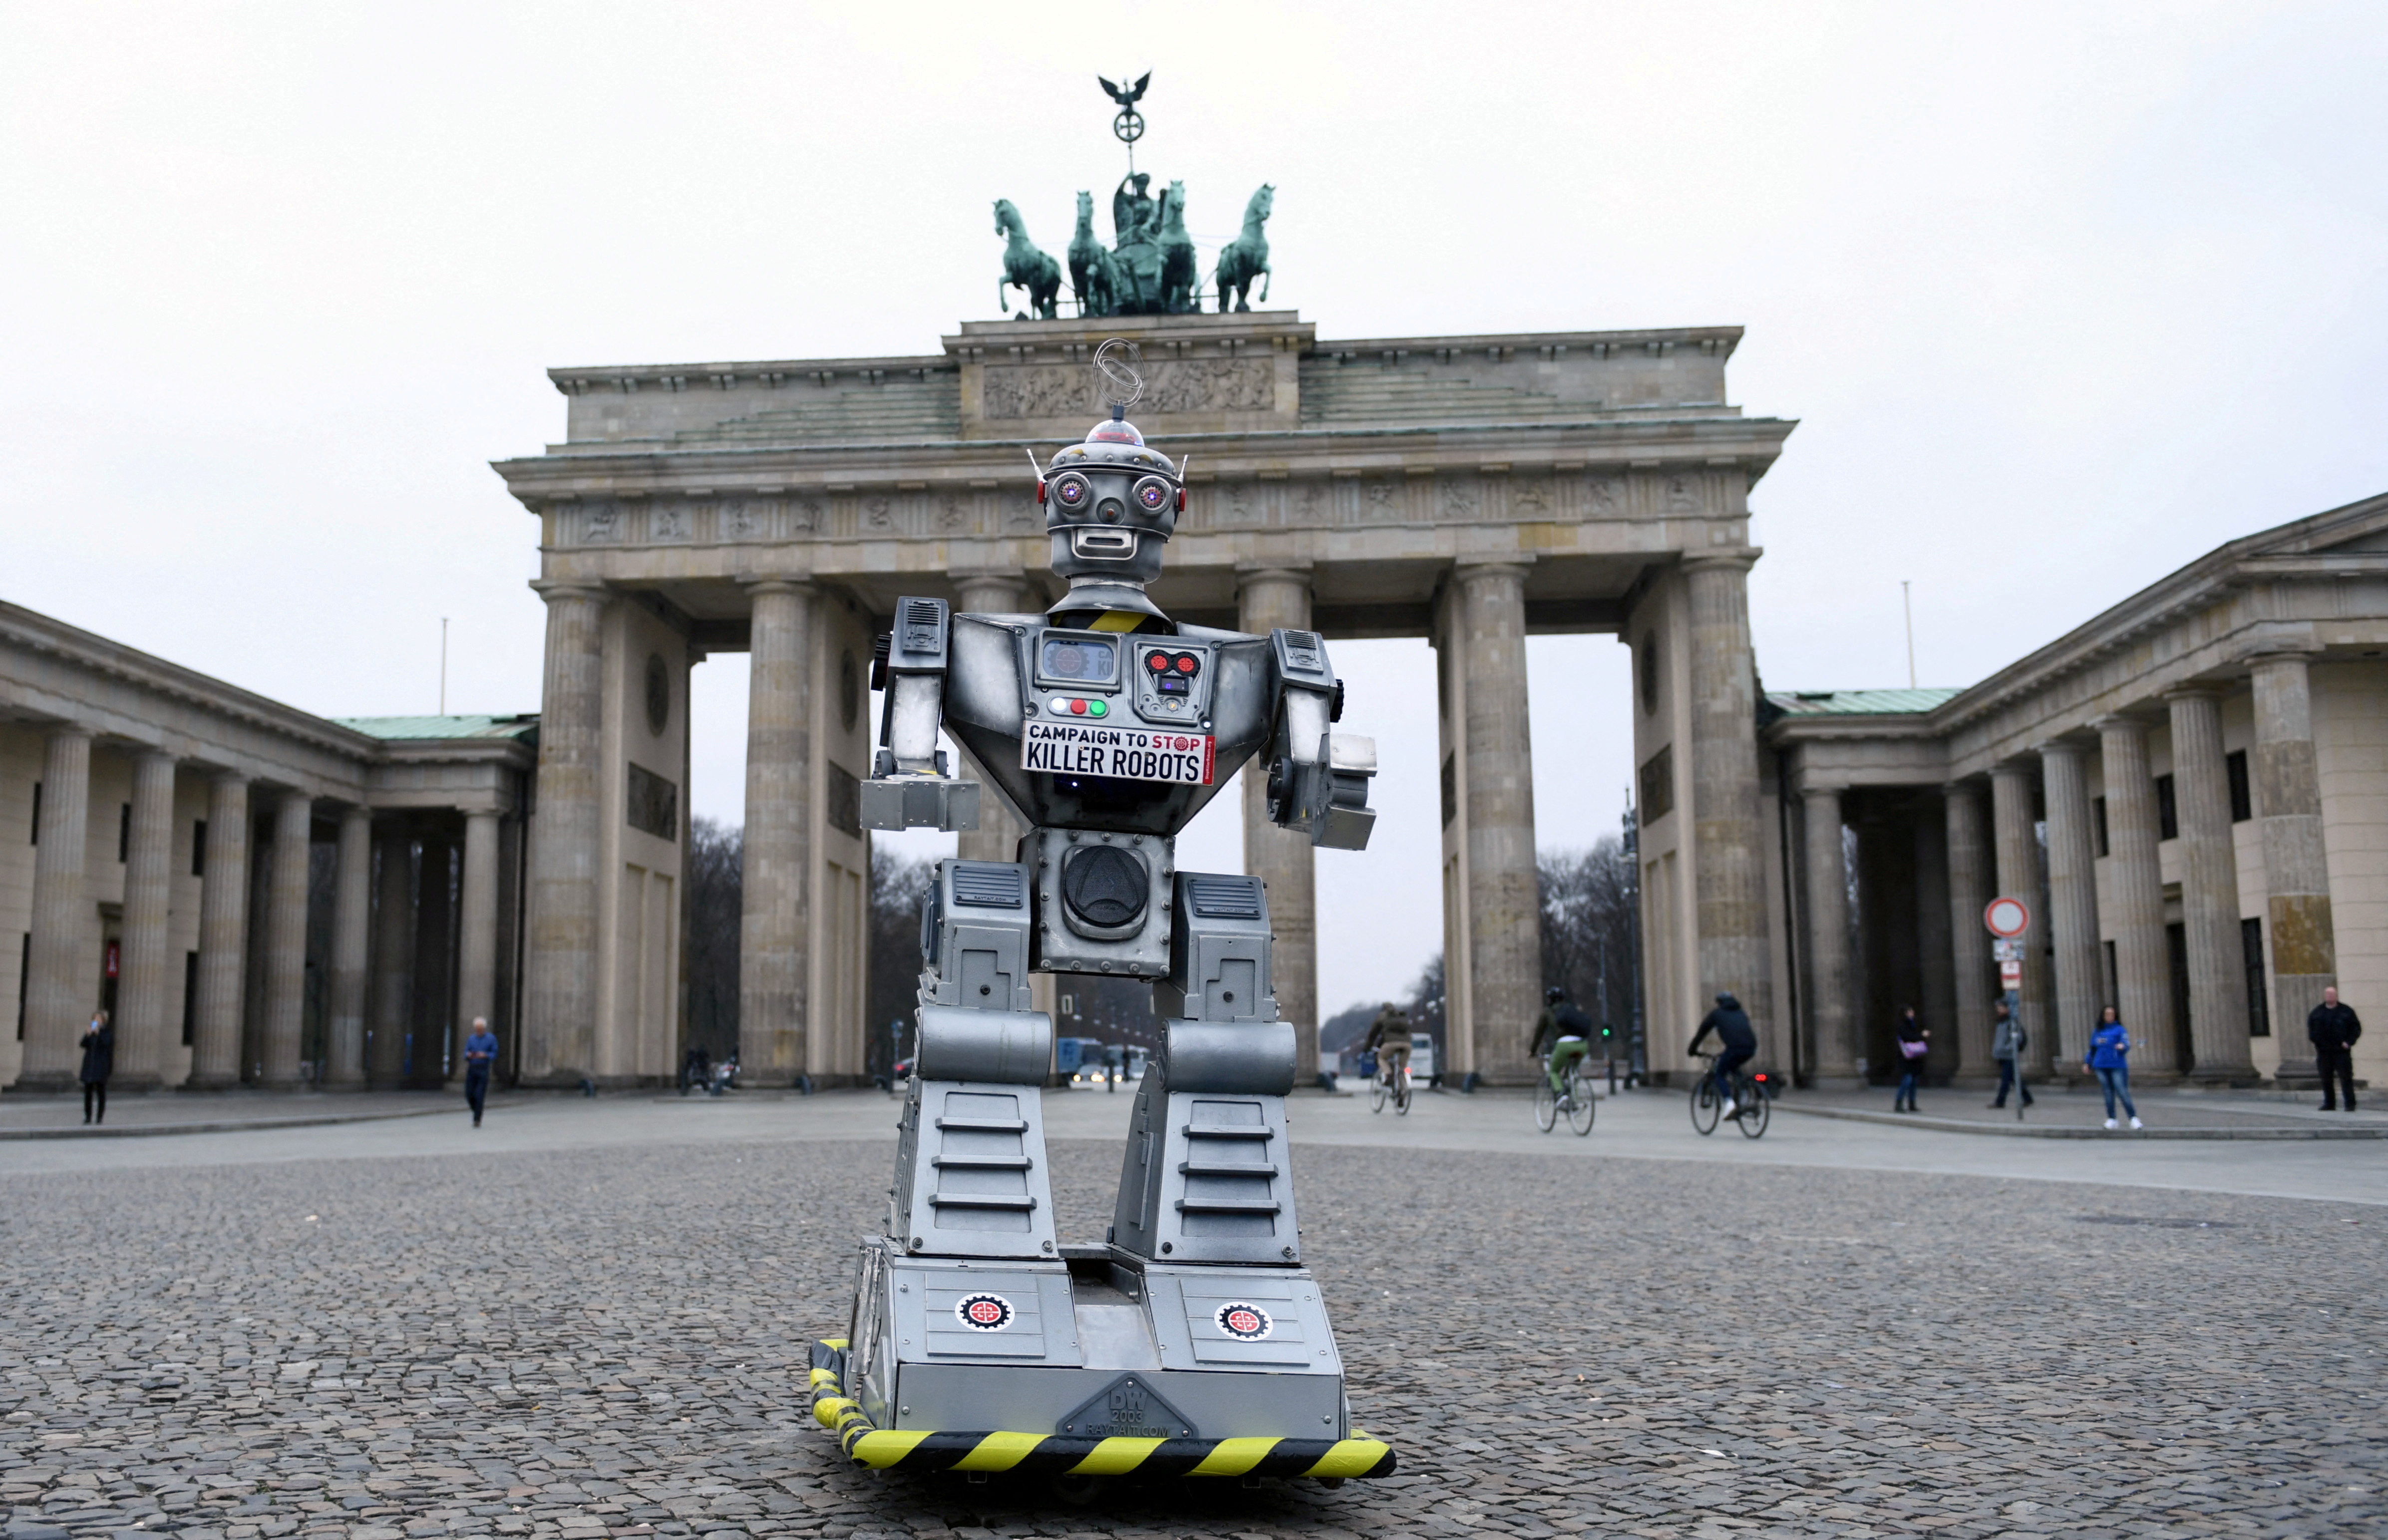 A robot is pictured as activists from the Campaign to Stop Killer Robots, a coalition of non-governmental organisations opposing lethal autonomous weapons or so-called 'killer robots', stage a protest at Brandenburg Gate in Berlin